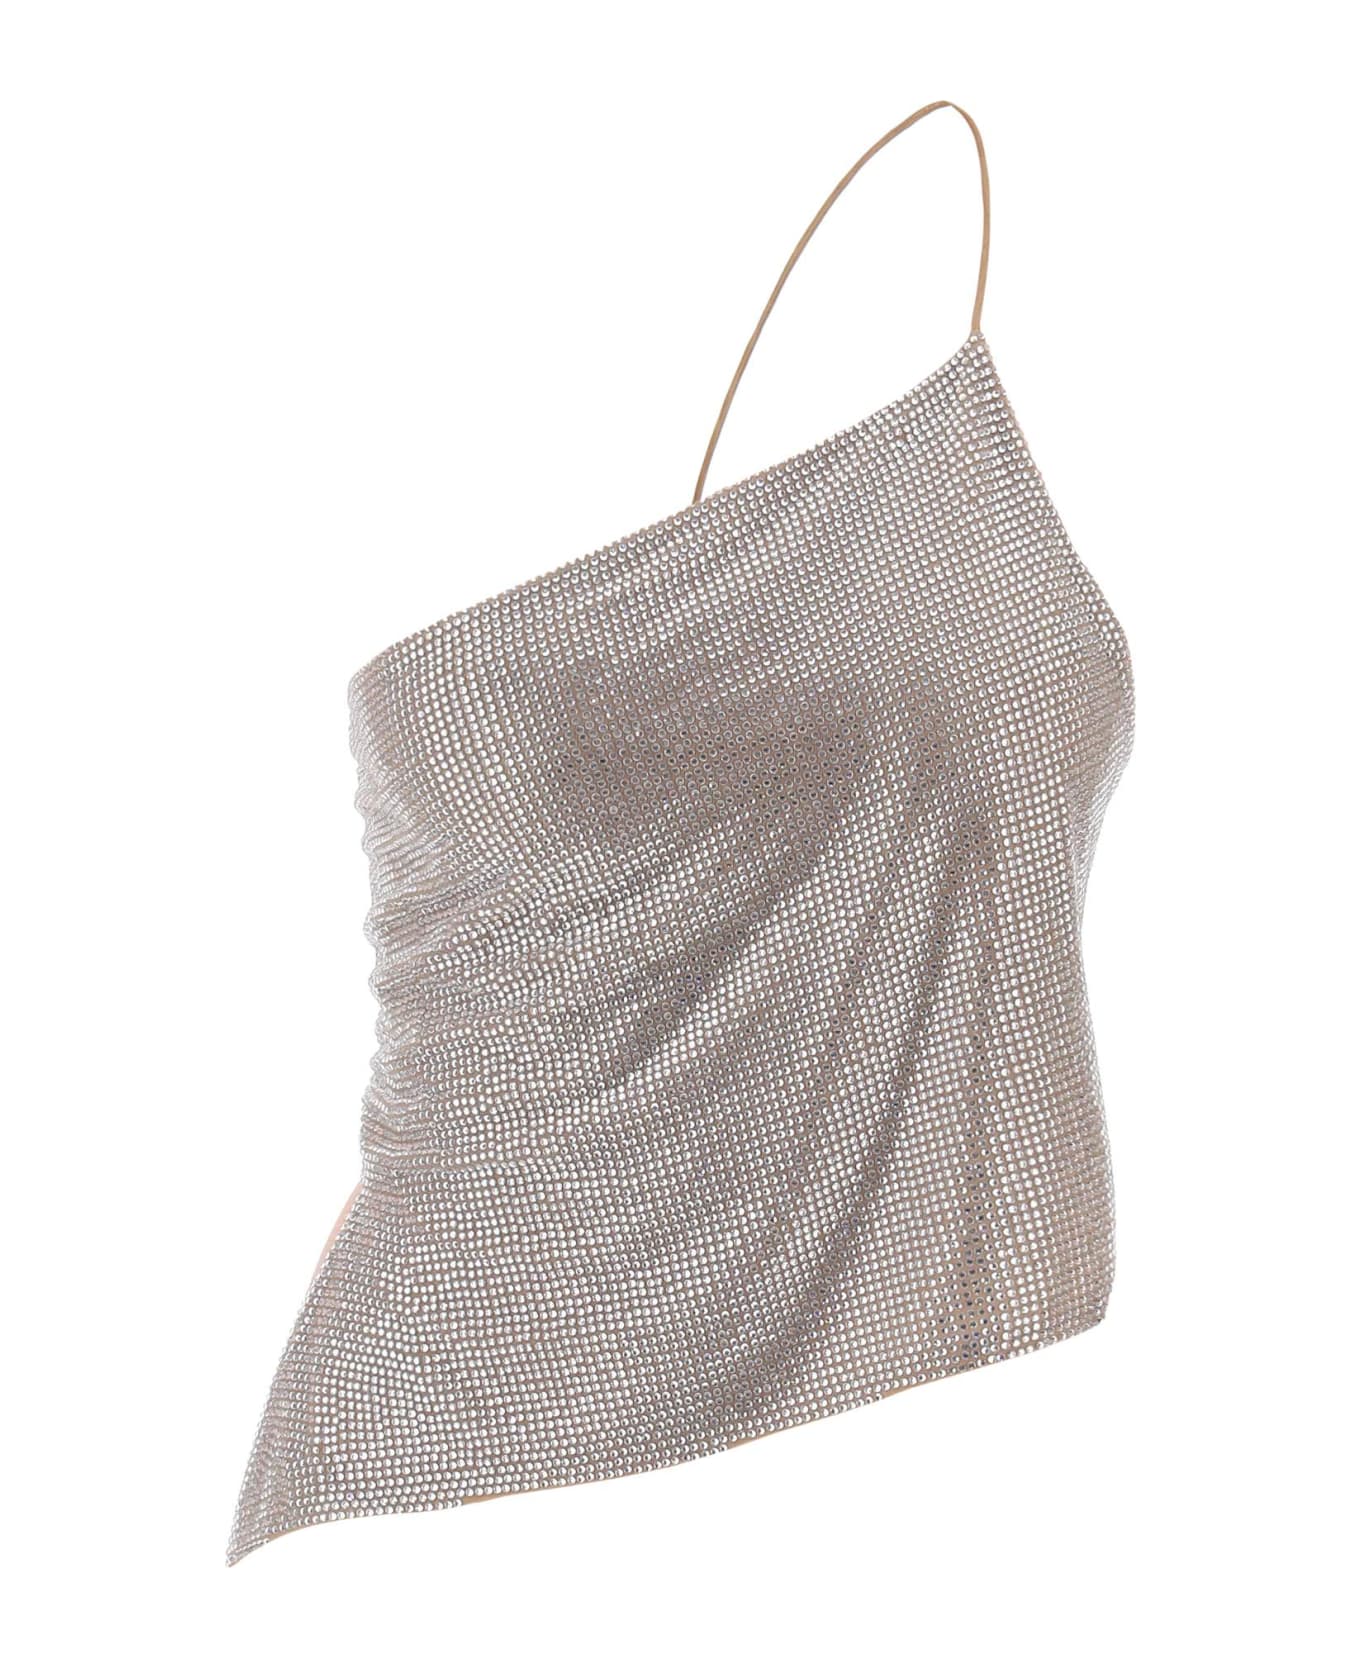 Giuseppe di Morabito Cropped Top In Mesh With Crystals All-over - SILVER (Beige)